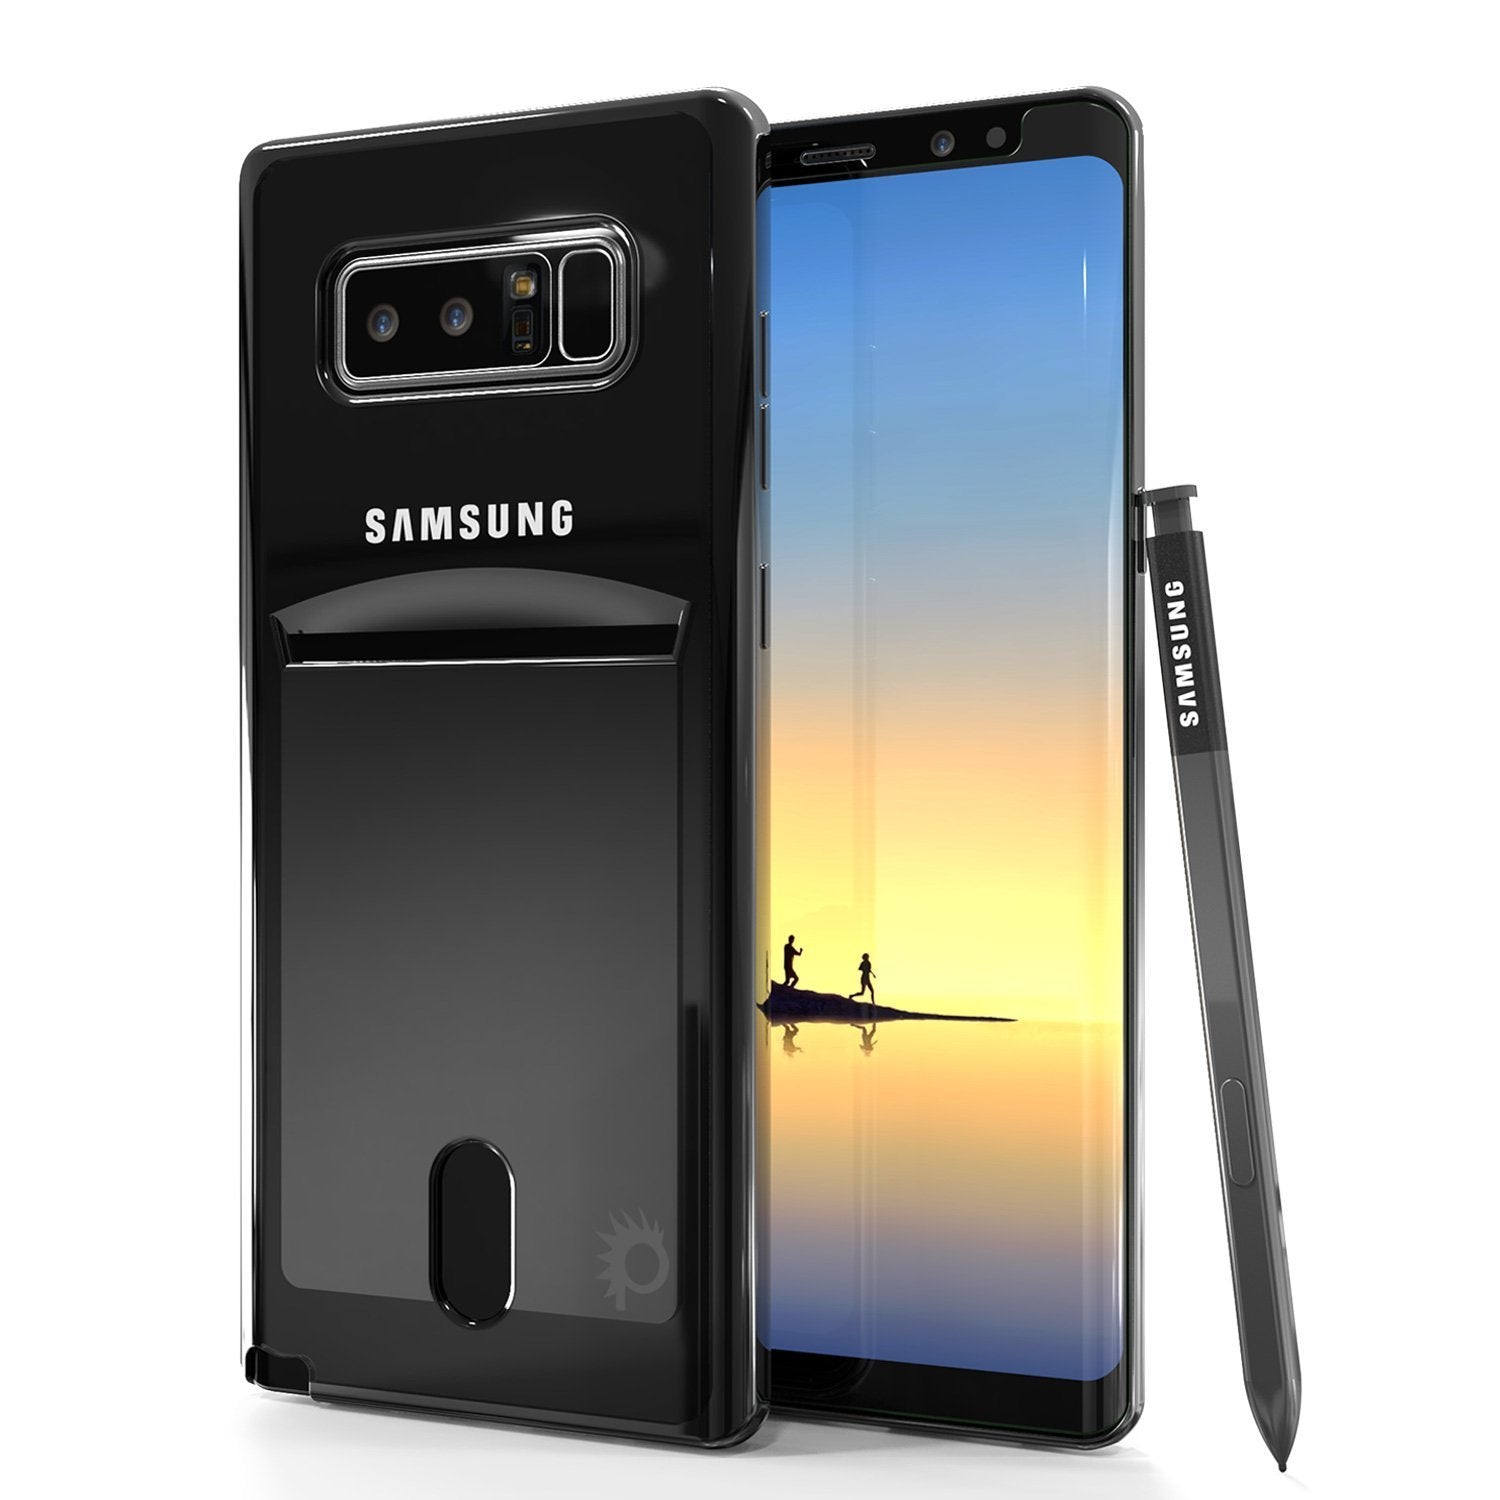 Galaxy Note 8 Case, PUNKCASE® LUCID Black Series | Card Slot | SHIELD Screen Protector | Ultra fit (Color in image: Black)